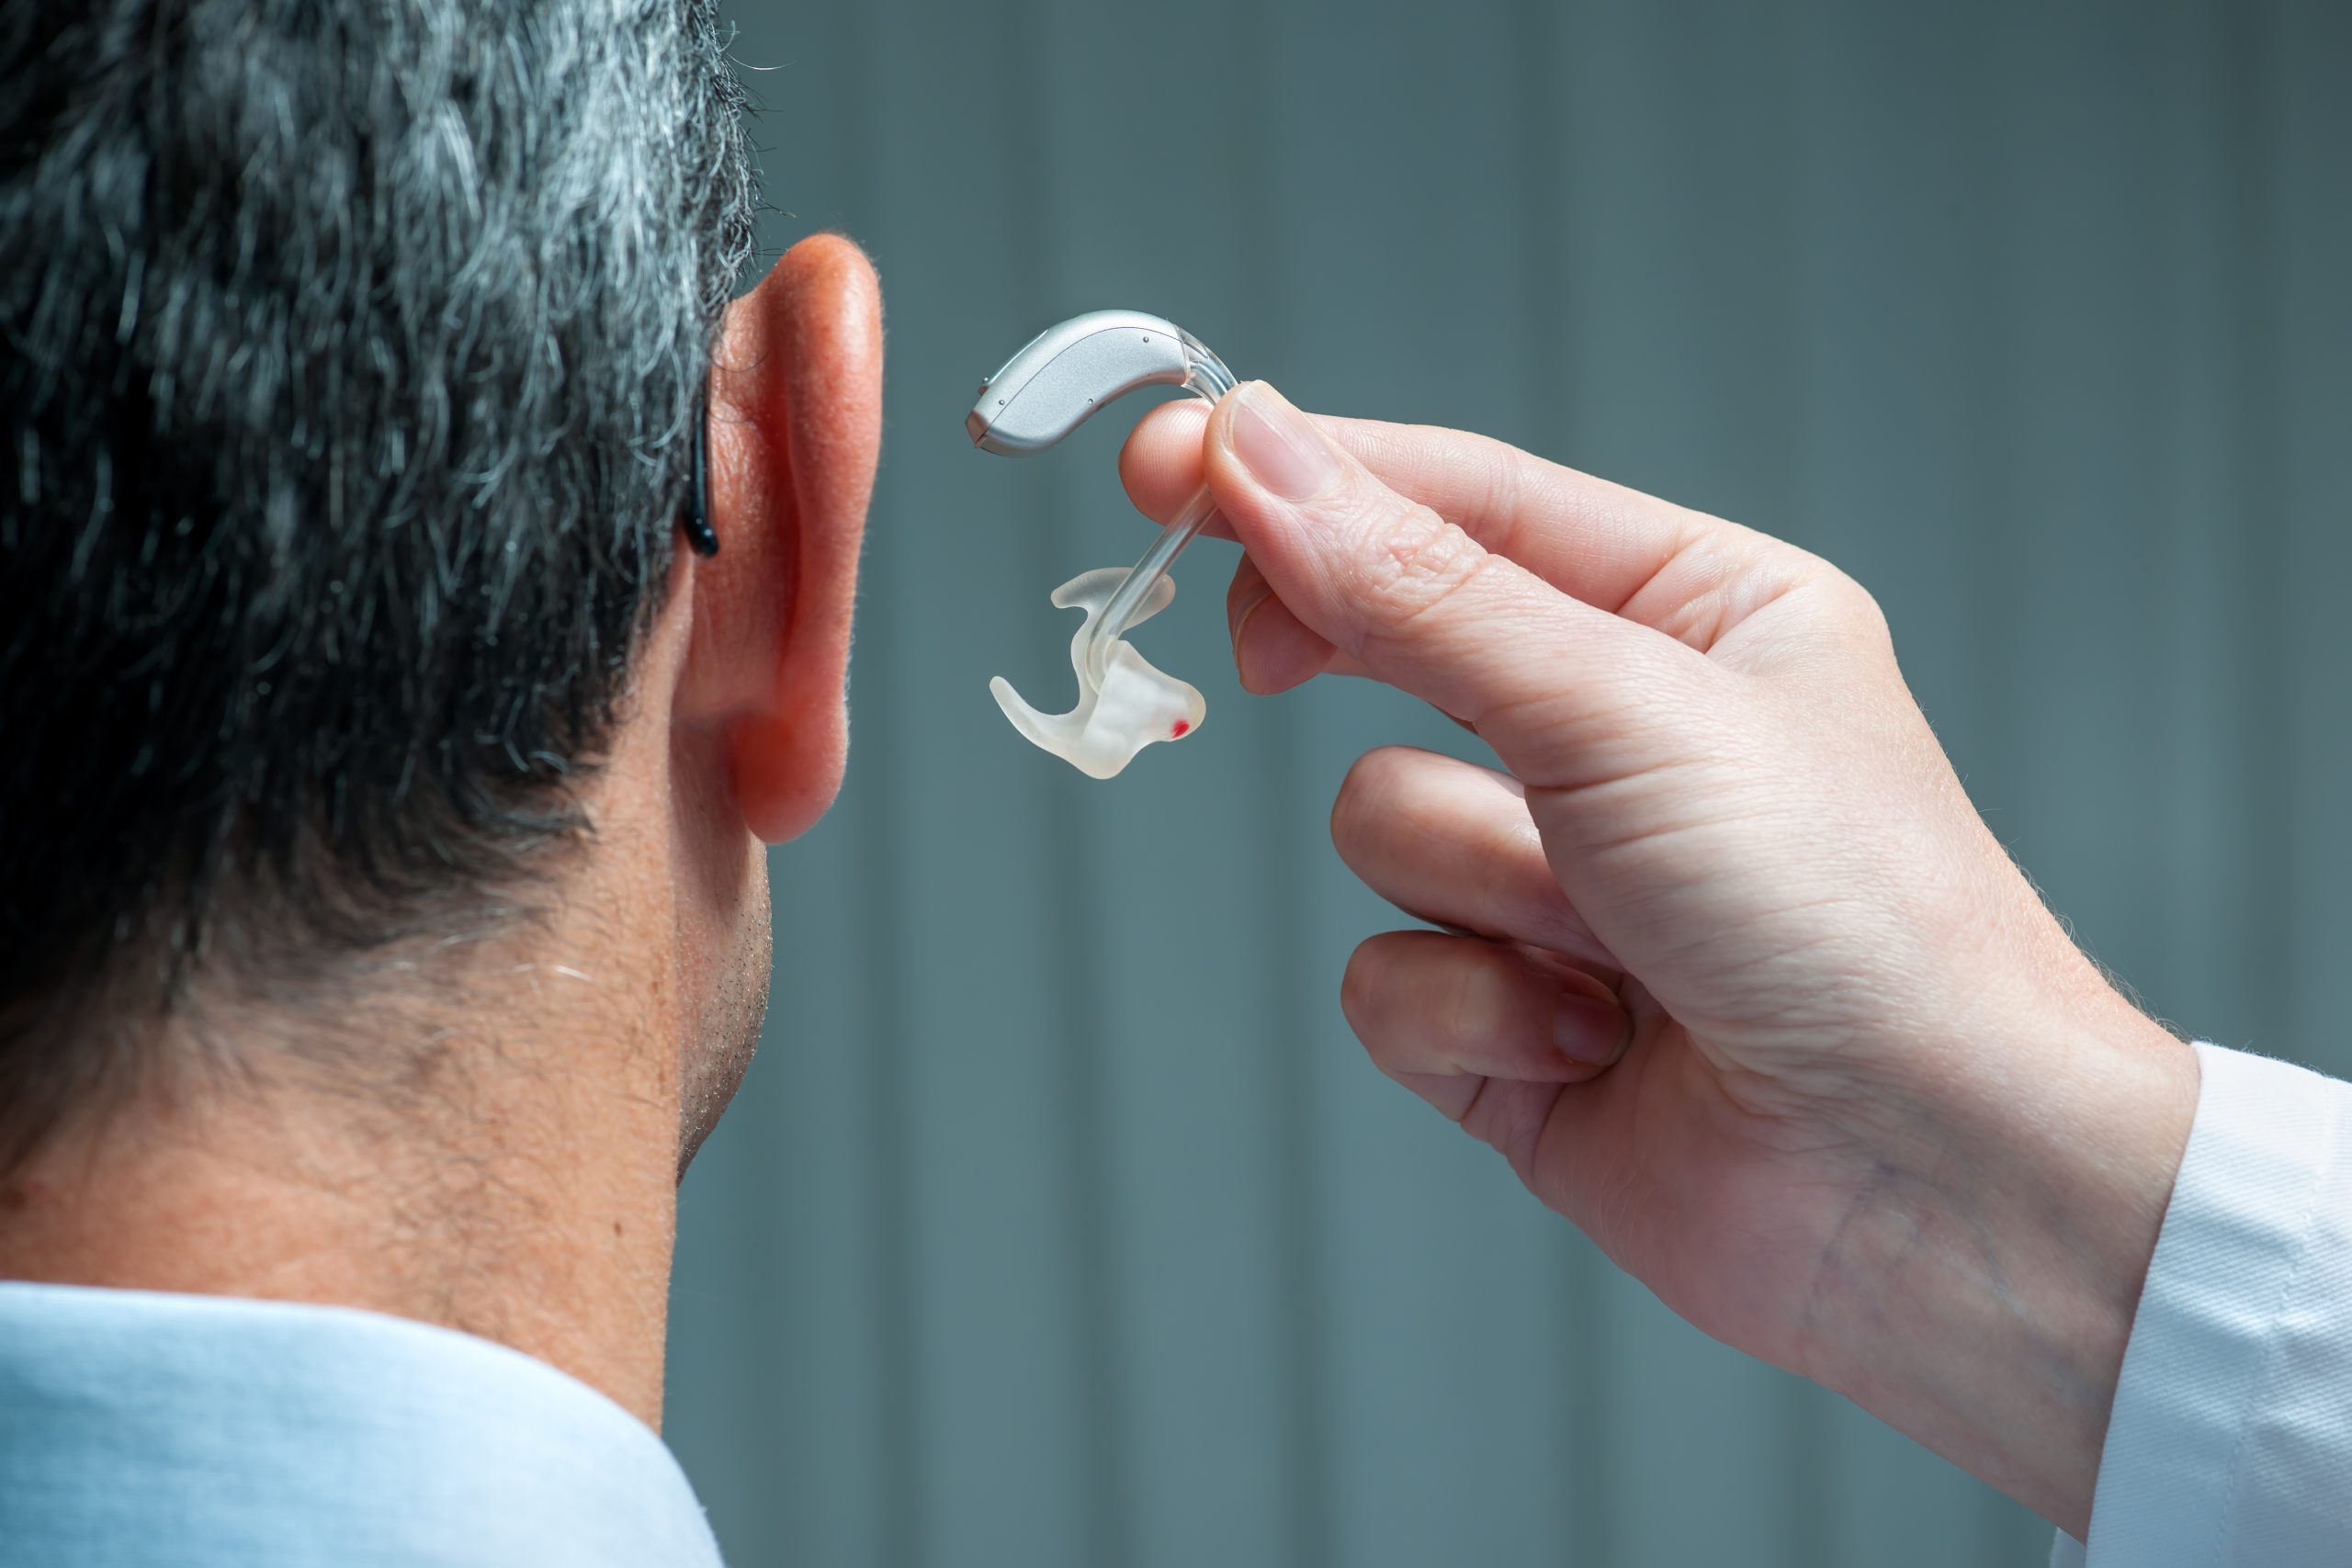 If I get hearing aids, will my hearing be perfect?